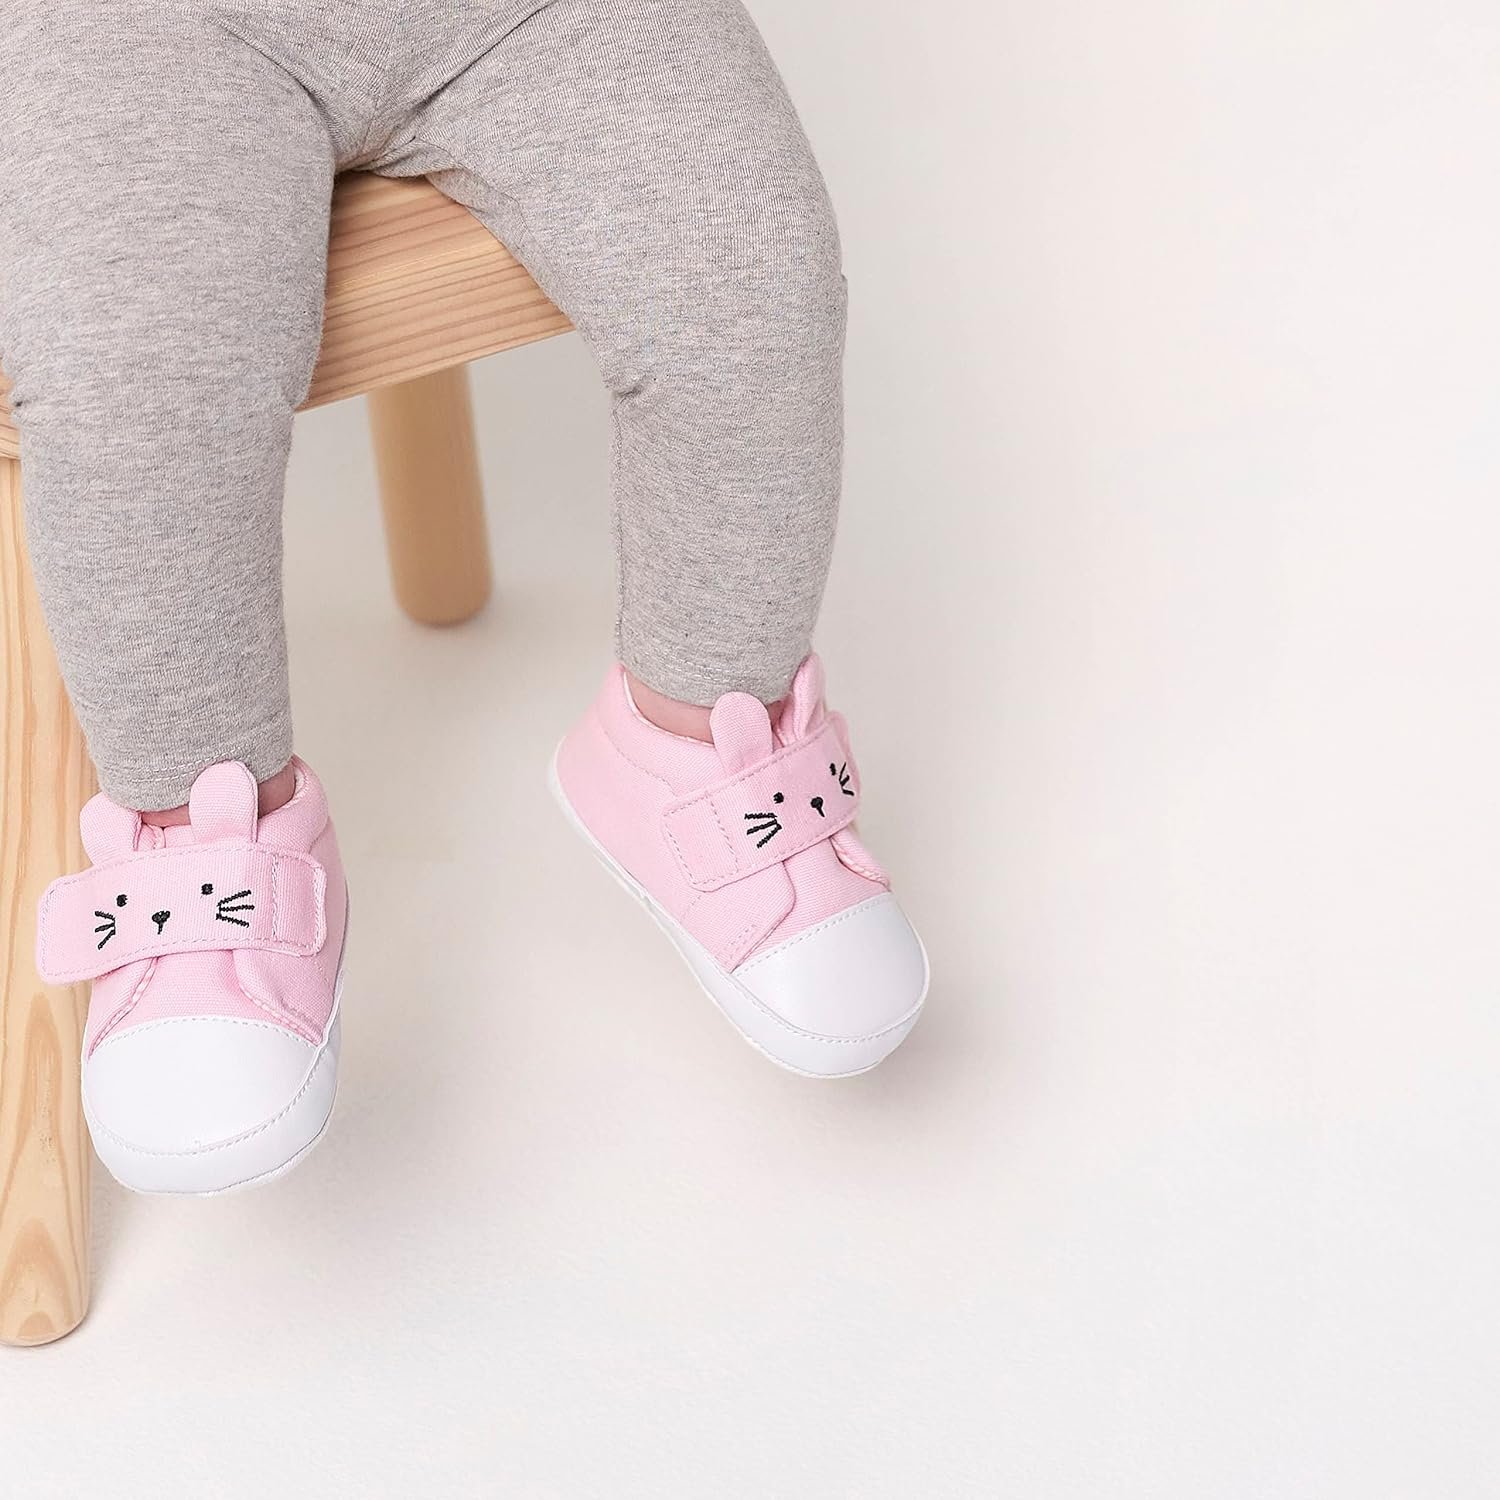 Gerber Unisex Baby Sneakers Crib Shoes Newborn Infant Toddler Neutral Boy Girl Bunny Pink 3-6 Months